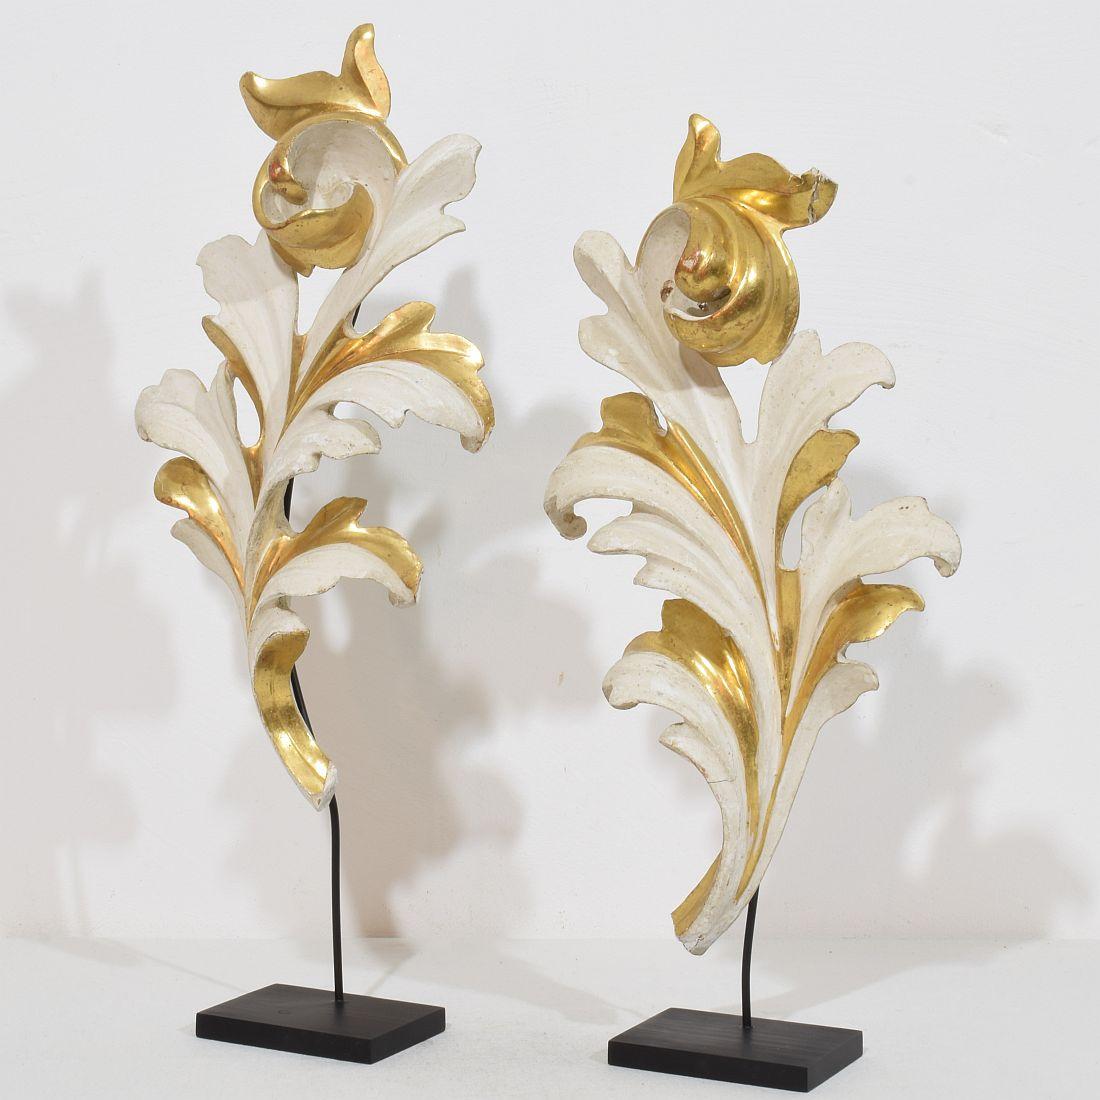 Beautiful handcarved giltwood acanthus leaf curl ornaments that once adorned a chapel .Original period pieces that due their high age have a wonderful weathered look.
Italy circa 1780/1850 , weathered, old repair.
Measurements are individual and